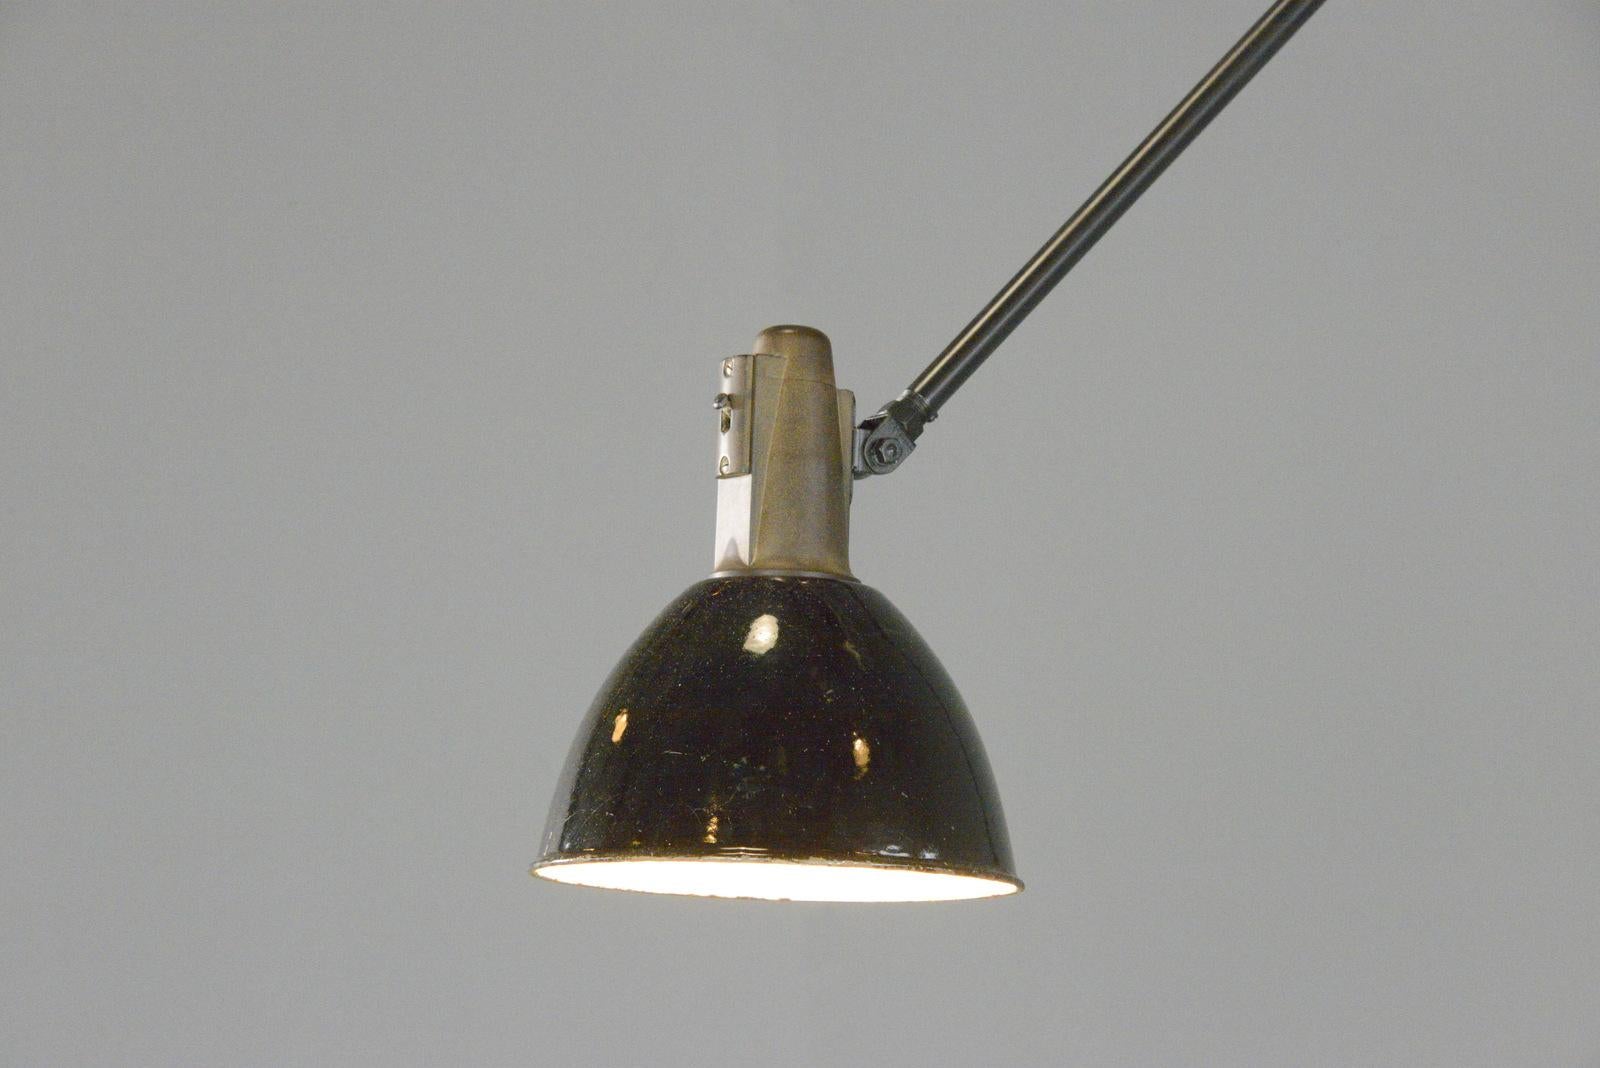 Bauhaus Industrial Task Lamp By Willhelm Bader Circa 1930s For Sale